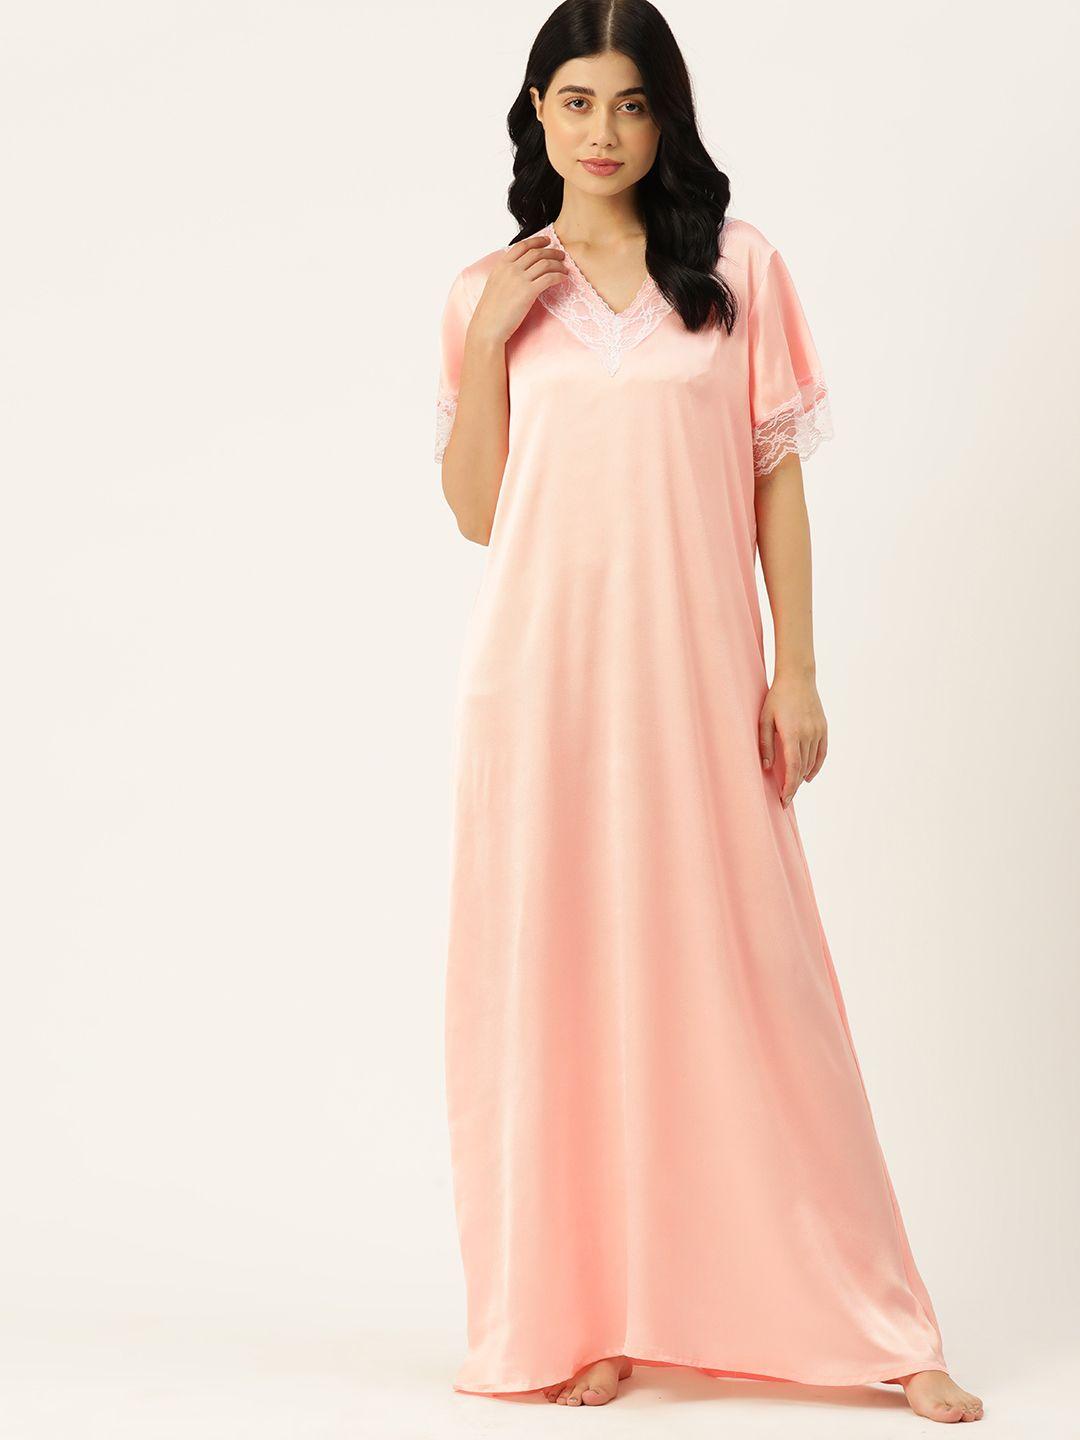 etc solid satin maxi nightdress with lace details